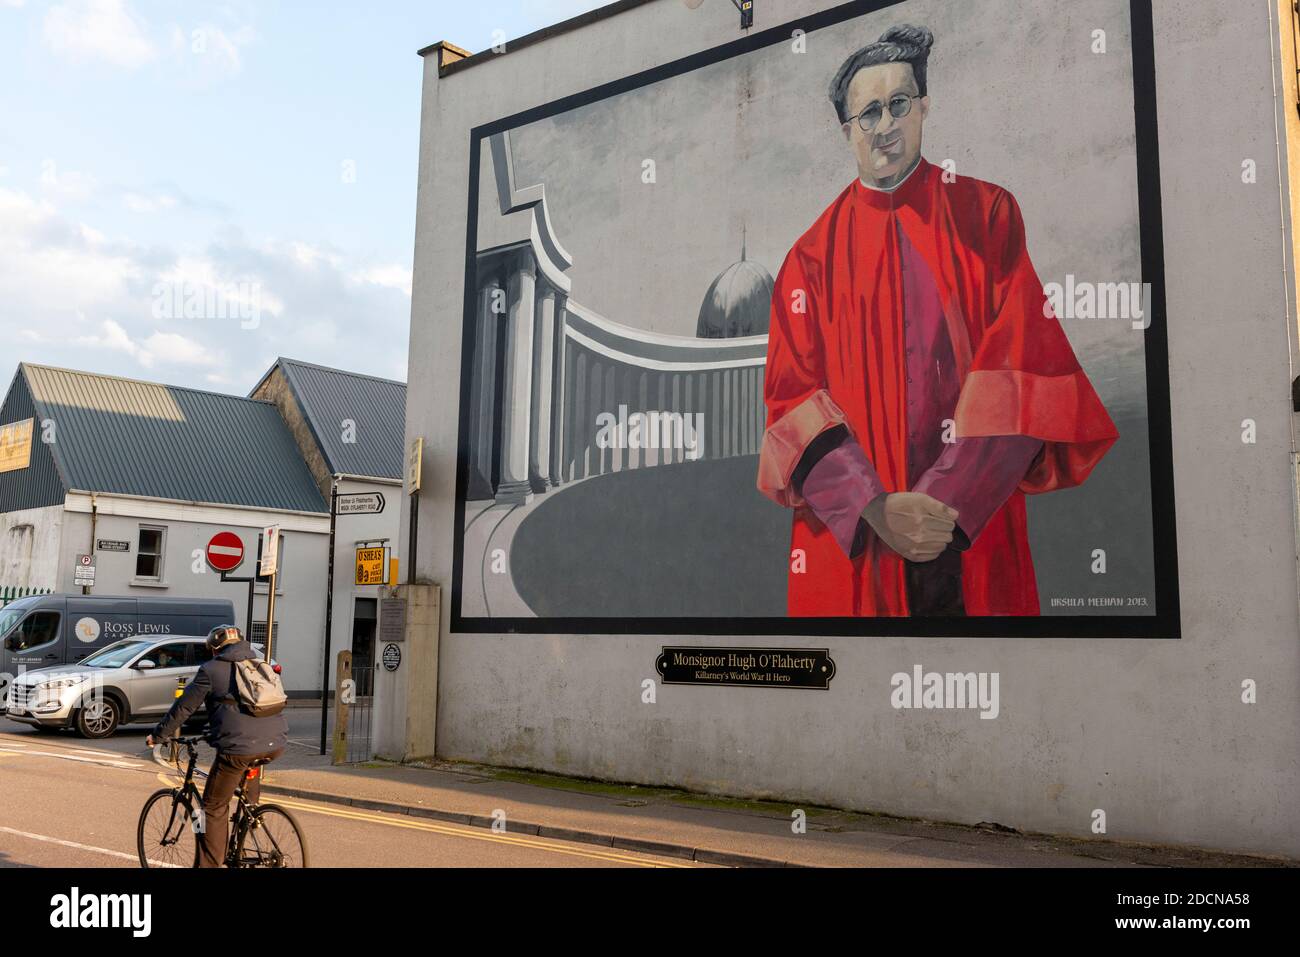 Mural and art work by Ursula Meehan and Commemorative Plaque for Monsignor Hugh O'Flaherty in O'Flaherty Street Killarney, County Kerry, Ireland Stock Photo